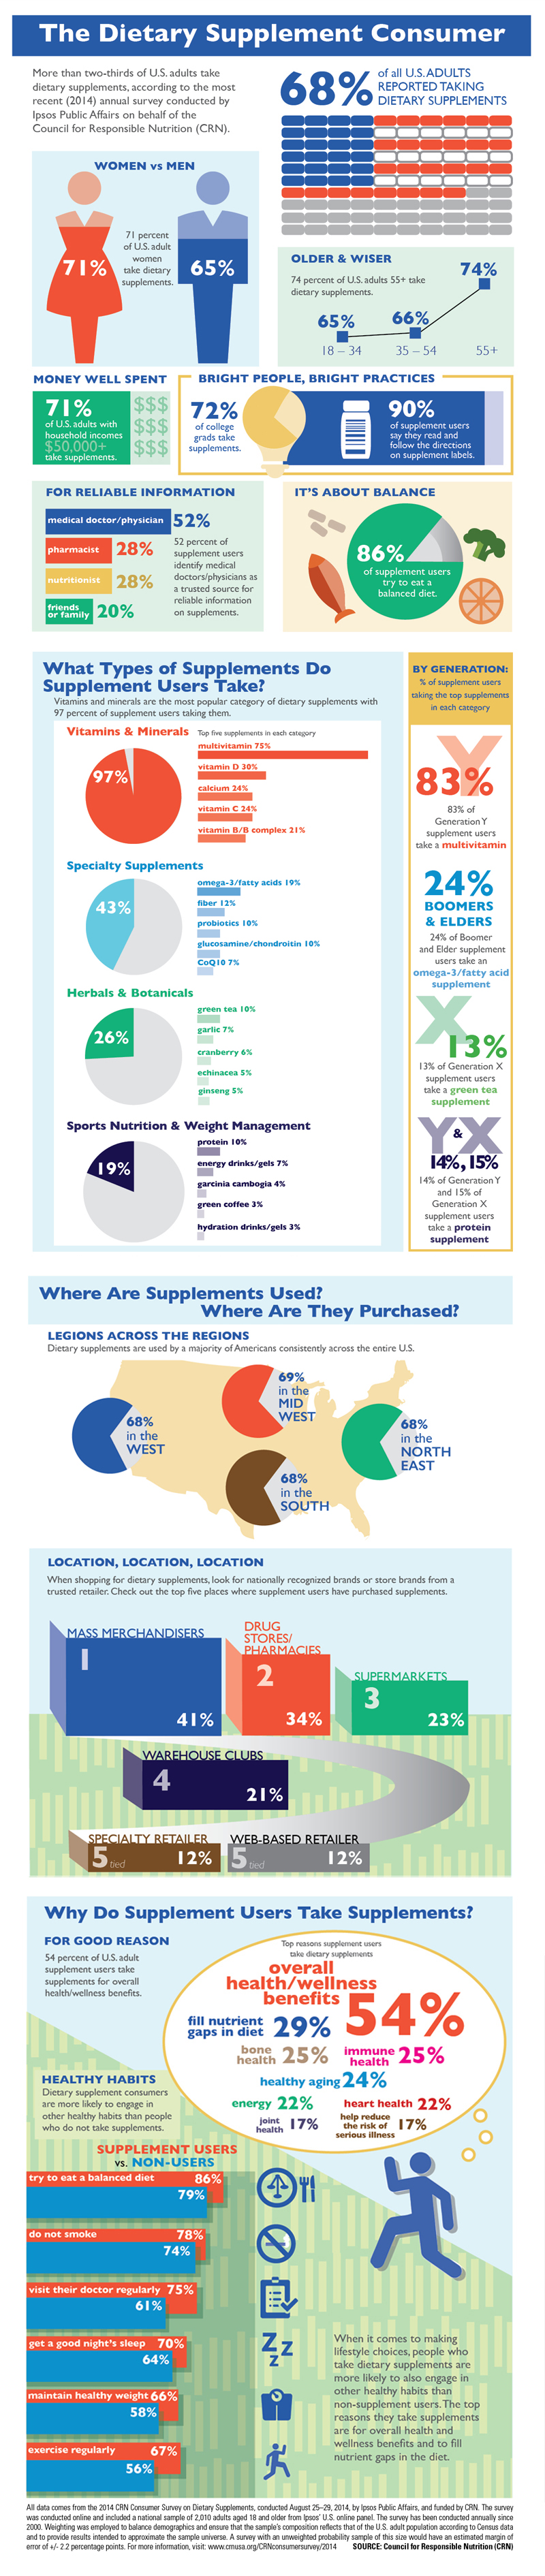 The Dietary Supplement Consumer: Top questions answered about the more than two-thirds of U.S. adults
taking dietary supplements, according to the most recent (2014) annual survey conducted by Ipsos Public Affairs on behalf of the Council for Responsible Nutrition (CRN).  